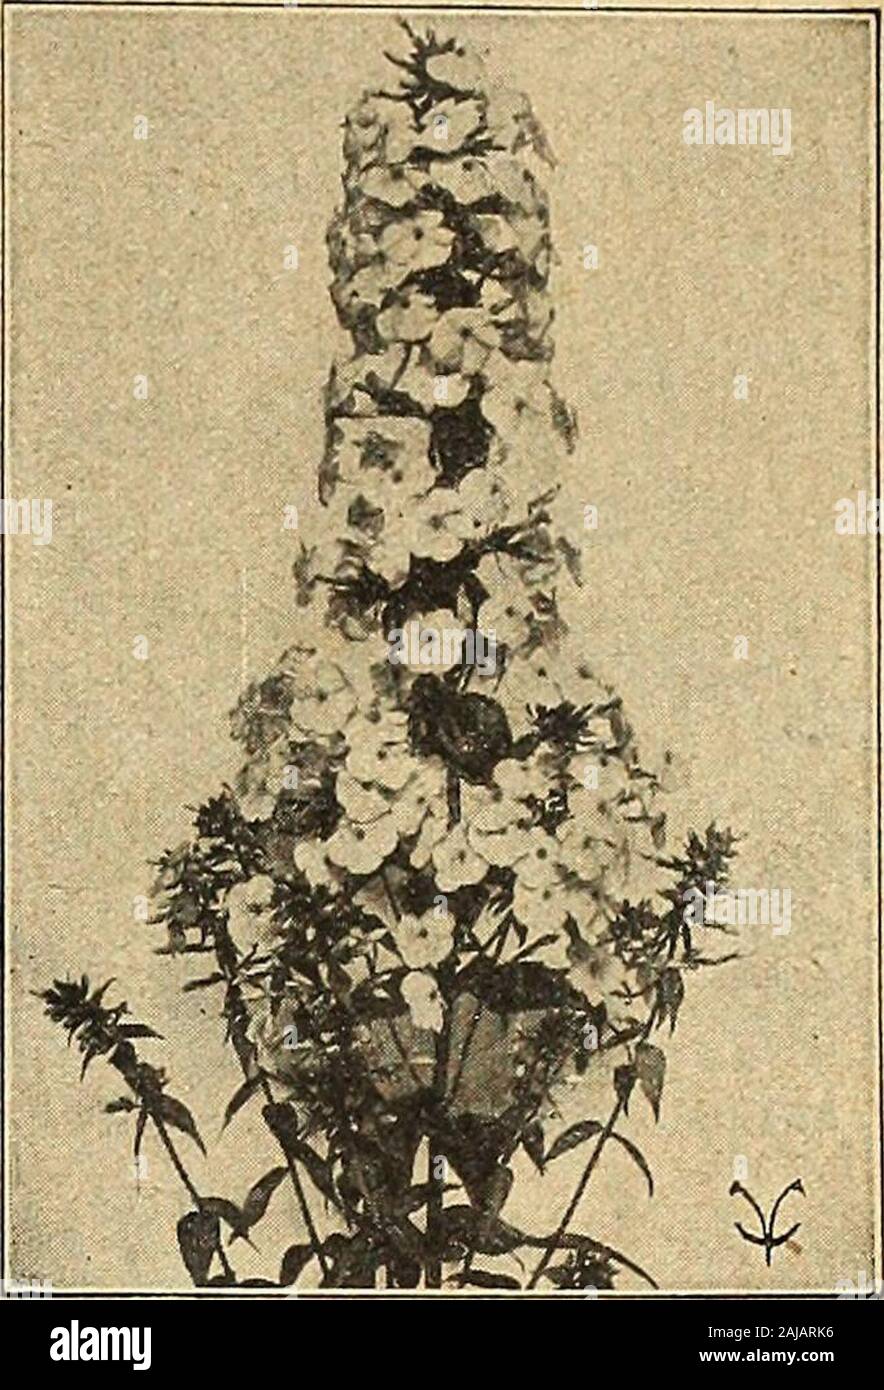 Vaughan's seed store . strain of seed from the originator Pkt. 25c 5415 —Uliginosum. 4. ft. Large giant daisy-like flowers, in great profusion. Plants, each 20c; doz., $2.00. HOz-&gt; 50c .Pkt. 10c RANUNCULUS Repens, Fl. PI. A showy plant bearing rosettes of double yellowflowers during May and June. Plants, each 20c; doz., $2.00. 5416 REHMANNIA Angulata. 6 in. Like Incarvillea, in rose and red shades. .Pkt. 25c 5418 RHEUM Palmatum Tanghuticum. 7 ft. Extremely ornamental foliage plant with enormous dark bronzy leaves, and tall white flower spikes, followed byscarlet seed pods Pkt. 5c 5419 ROMNE Stock Photo